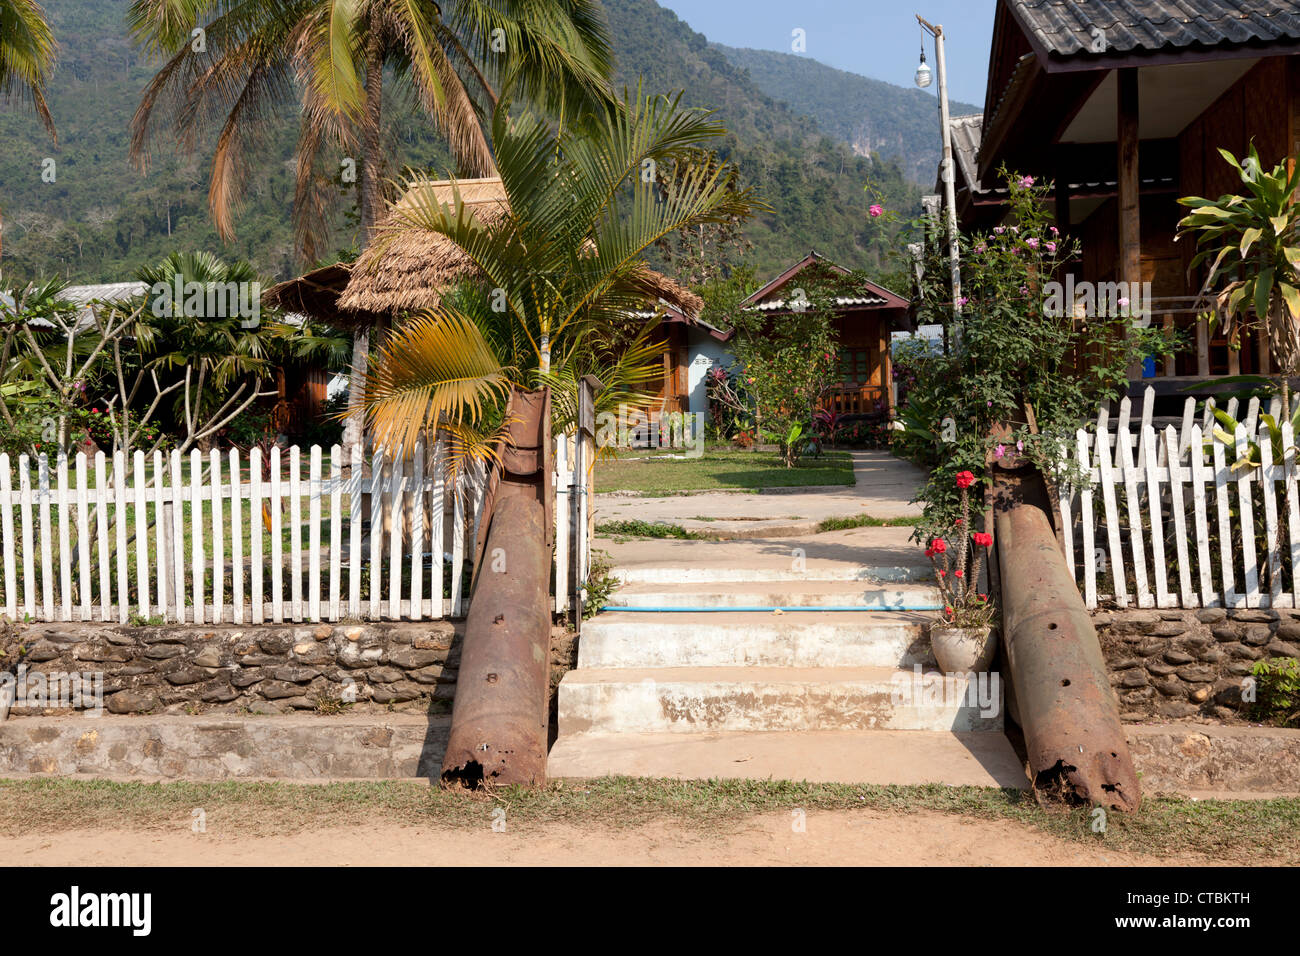 Metal casings of cluster bombs re-used as an entrance decoration of the Lattanavongsa resort (Muang Ngoi Neua - Laos). Stock Photo